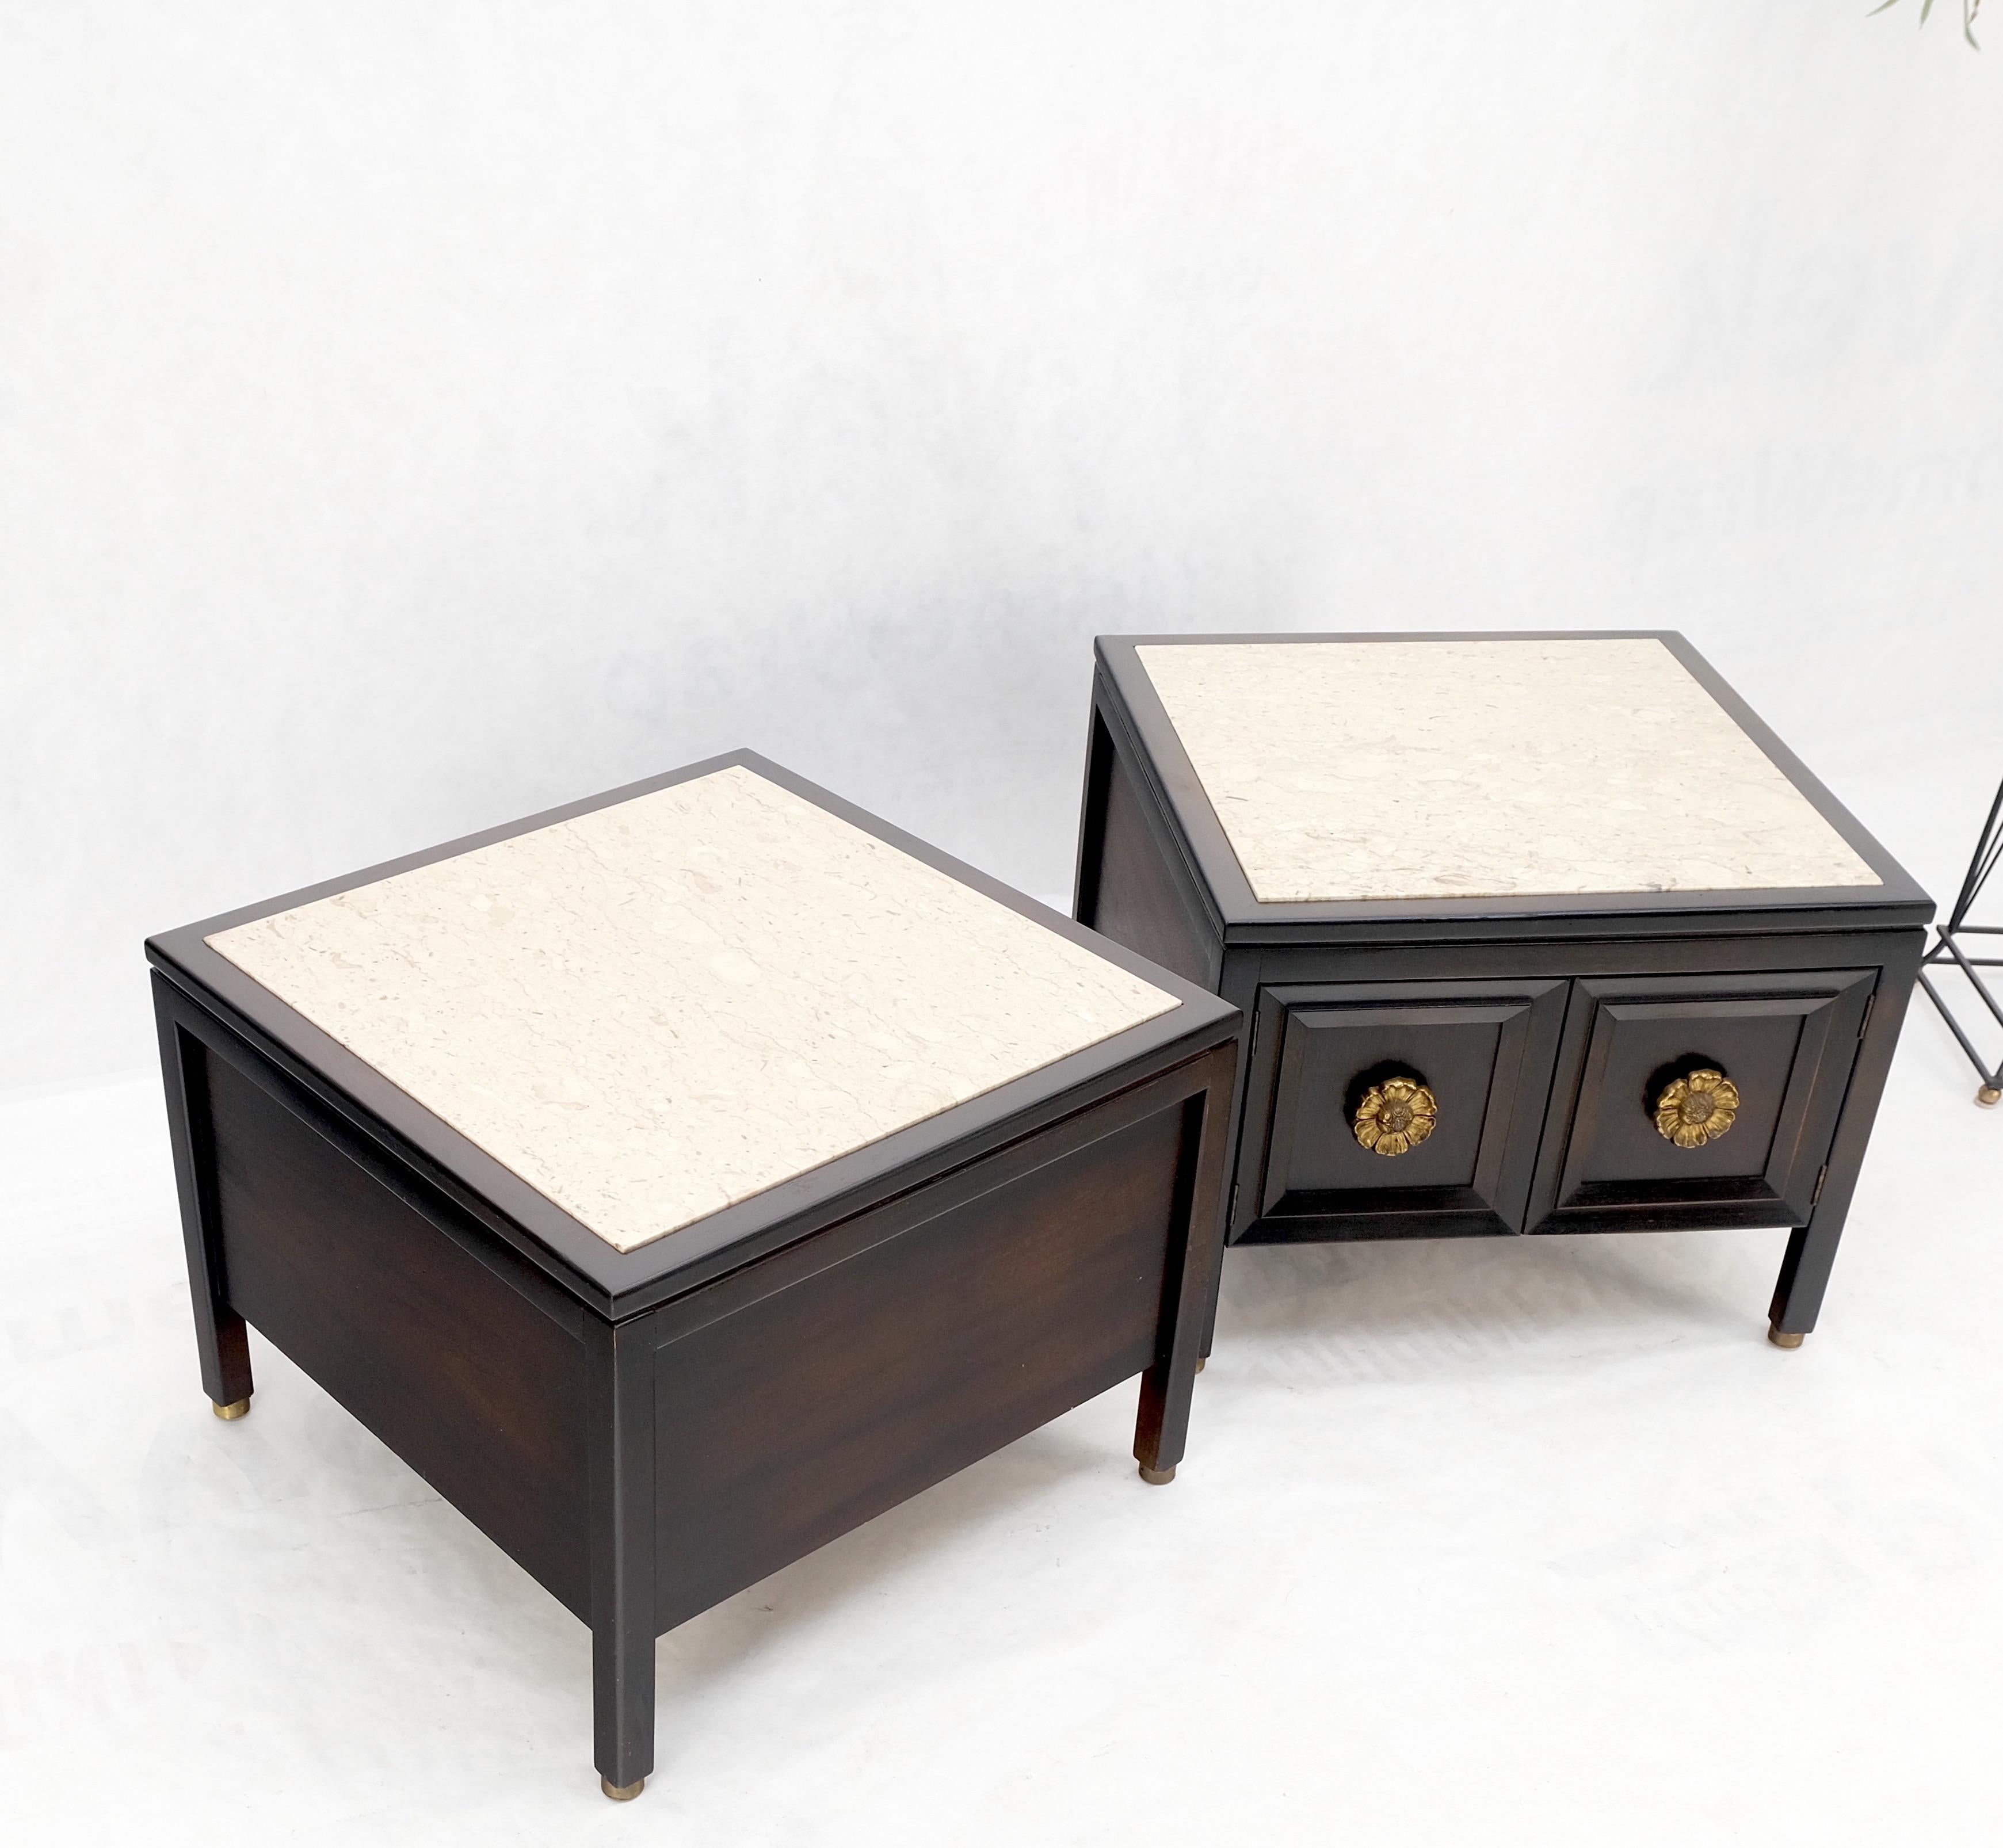 Pair square marble top 2 door nightstands end tables large decorative pulls brass feet tips mint.